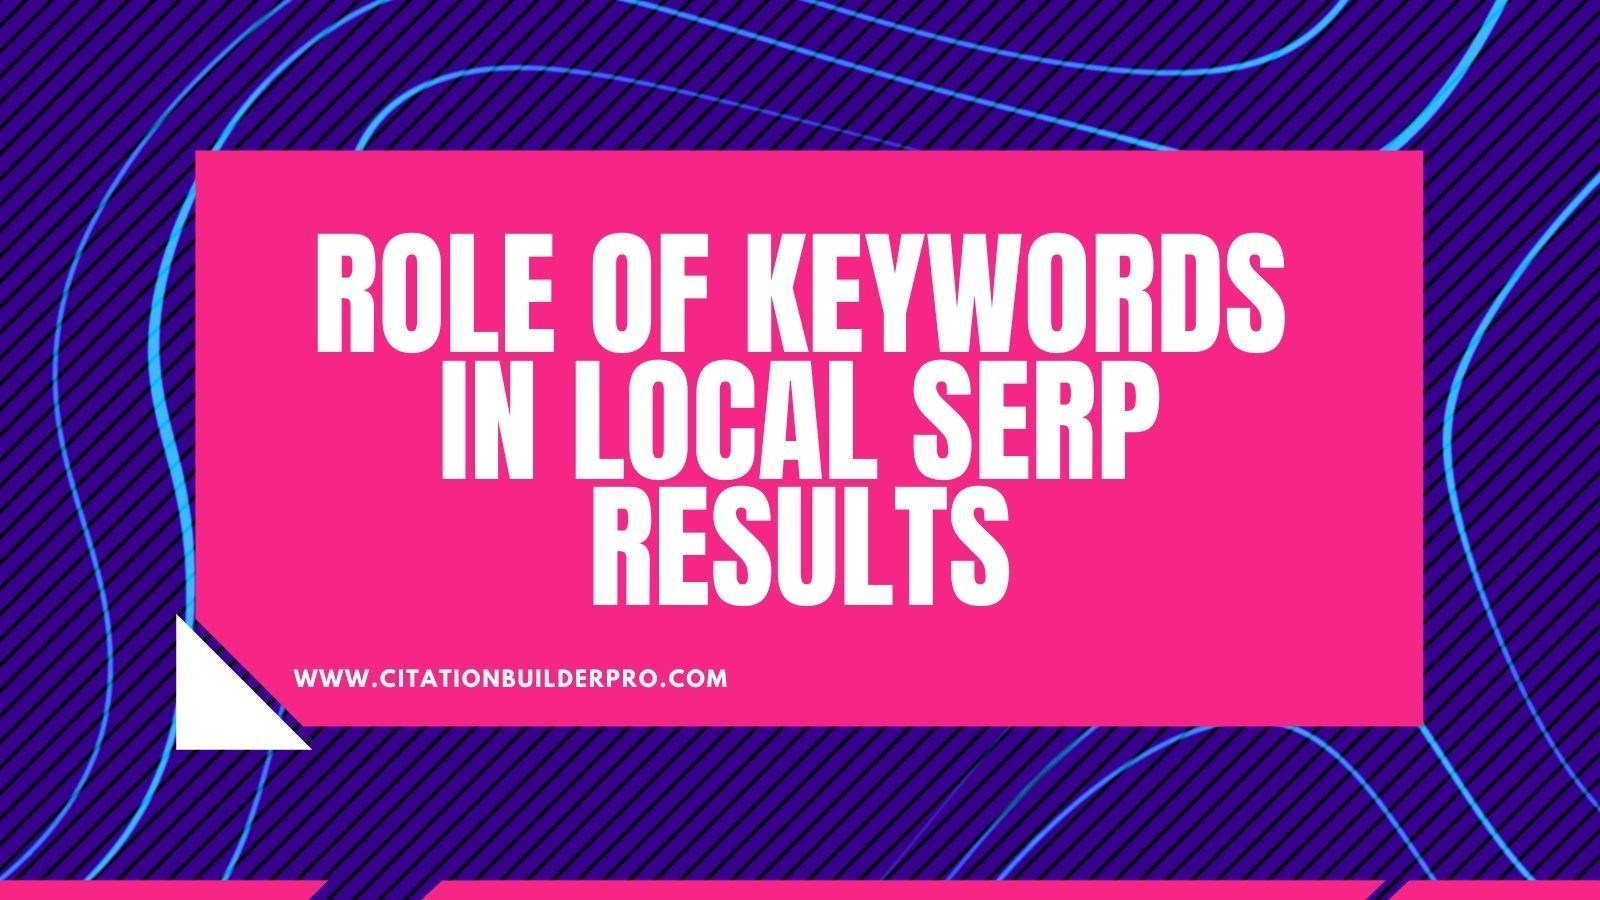 Role-of-keywords-in-local-serp-results